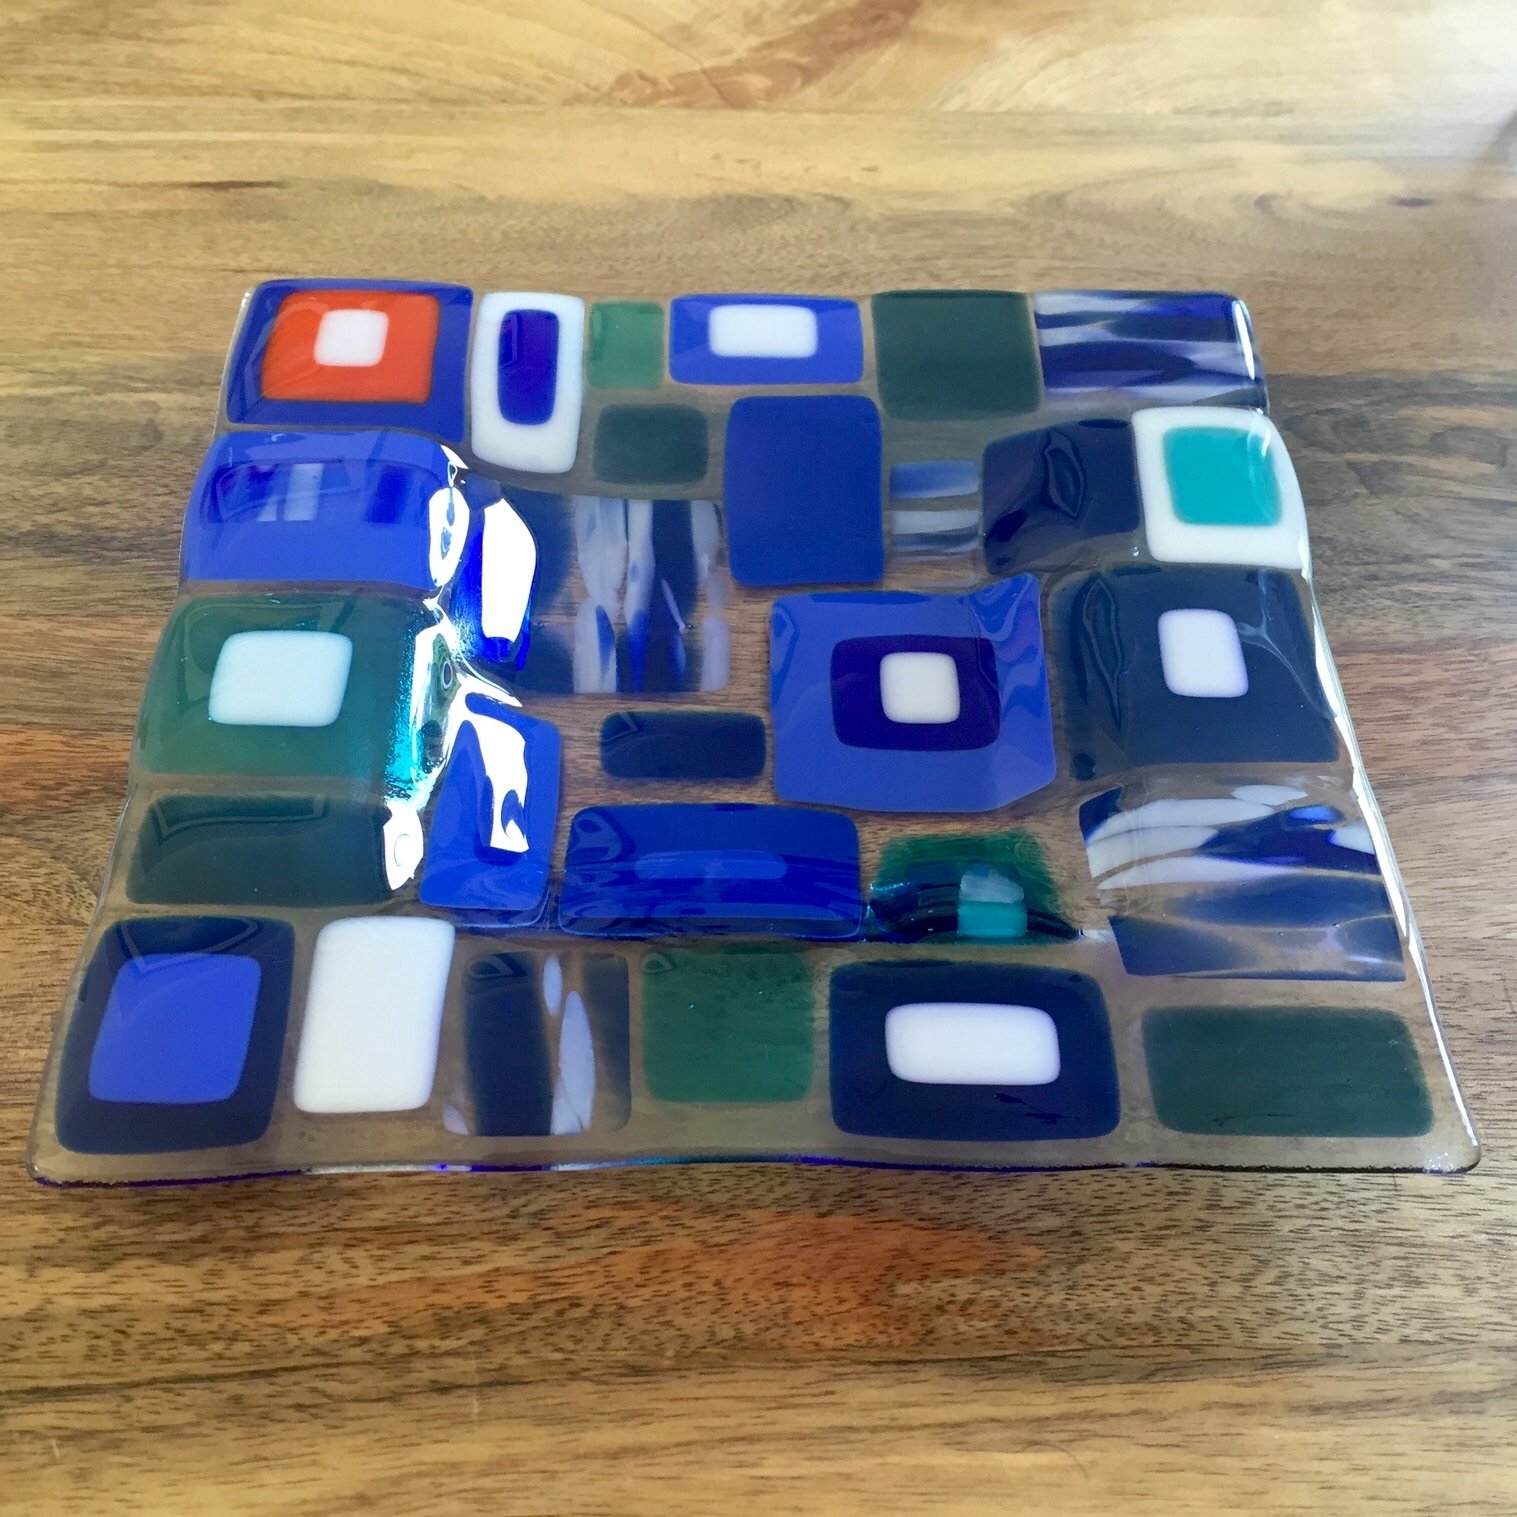 Hi I'm Catherine and I make unique items from fused glass.